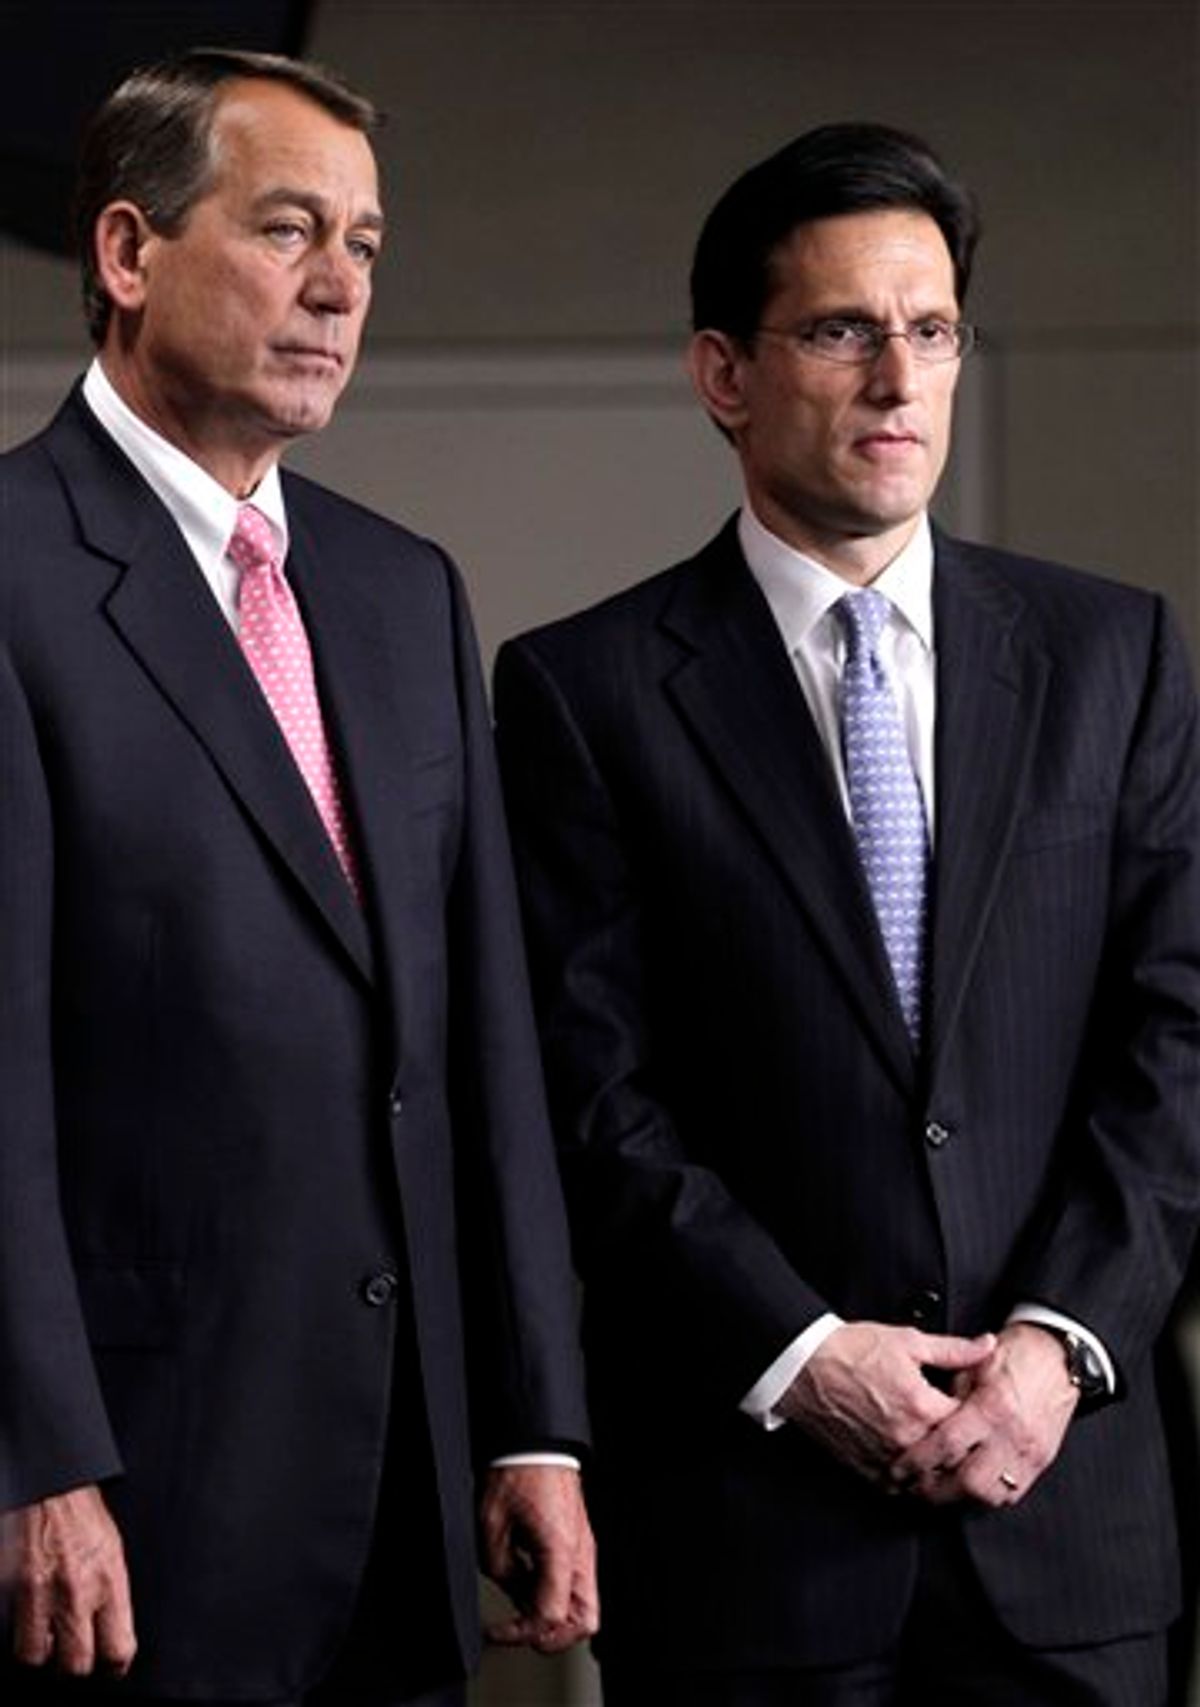 FILE -- In this file photo of Thursday, June 16, 2011, House Majority Leader Eric Cantor of Virginia, right, stands with House Speaker John Boehner of Ohio on Capitol Hill in Washington. Cantor, who has been participating in bipartisan budget talks headed by Vice President Joe Biden, pulled out today citing an impasse over taxes that required intervention by President Barack Obama and House Speaker John Boehner. (AP Photo/J. Scott Applewhite, File)  (AP)